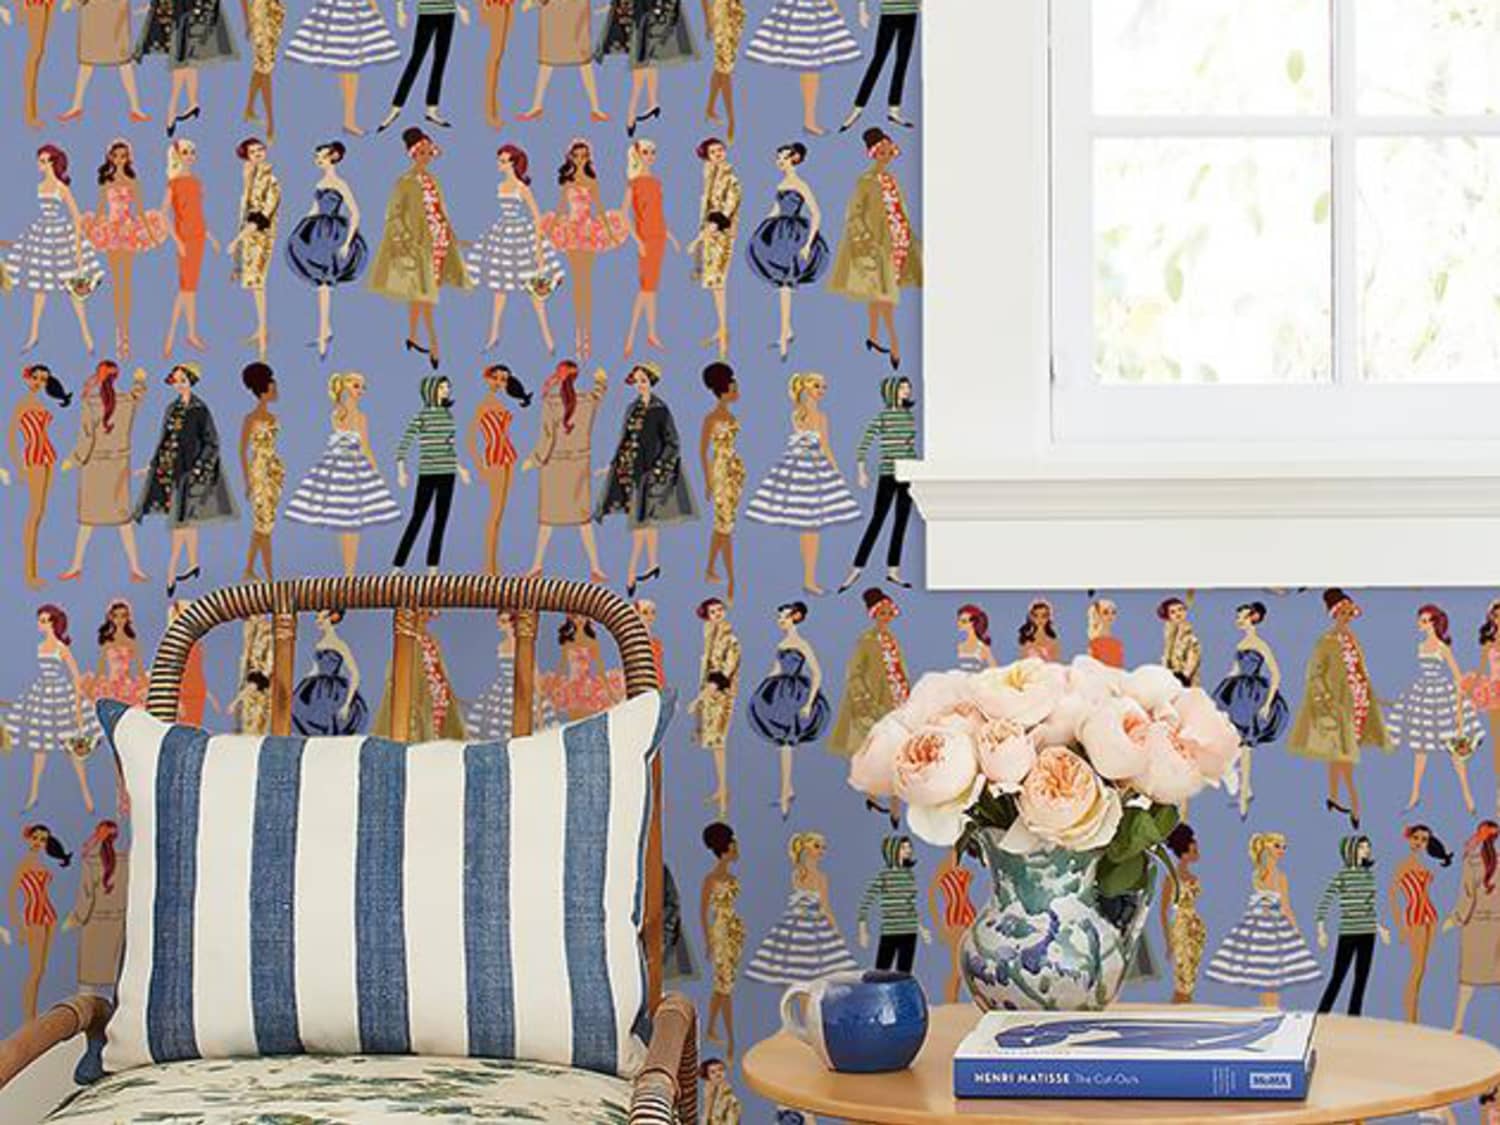 Mattel Created Nearly 200 Retro Glam Vintage Barbie-Themed Wallpaper  Designs | Apartment Therapy